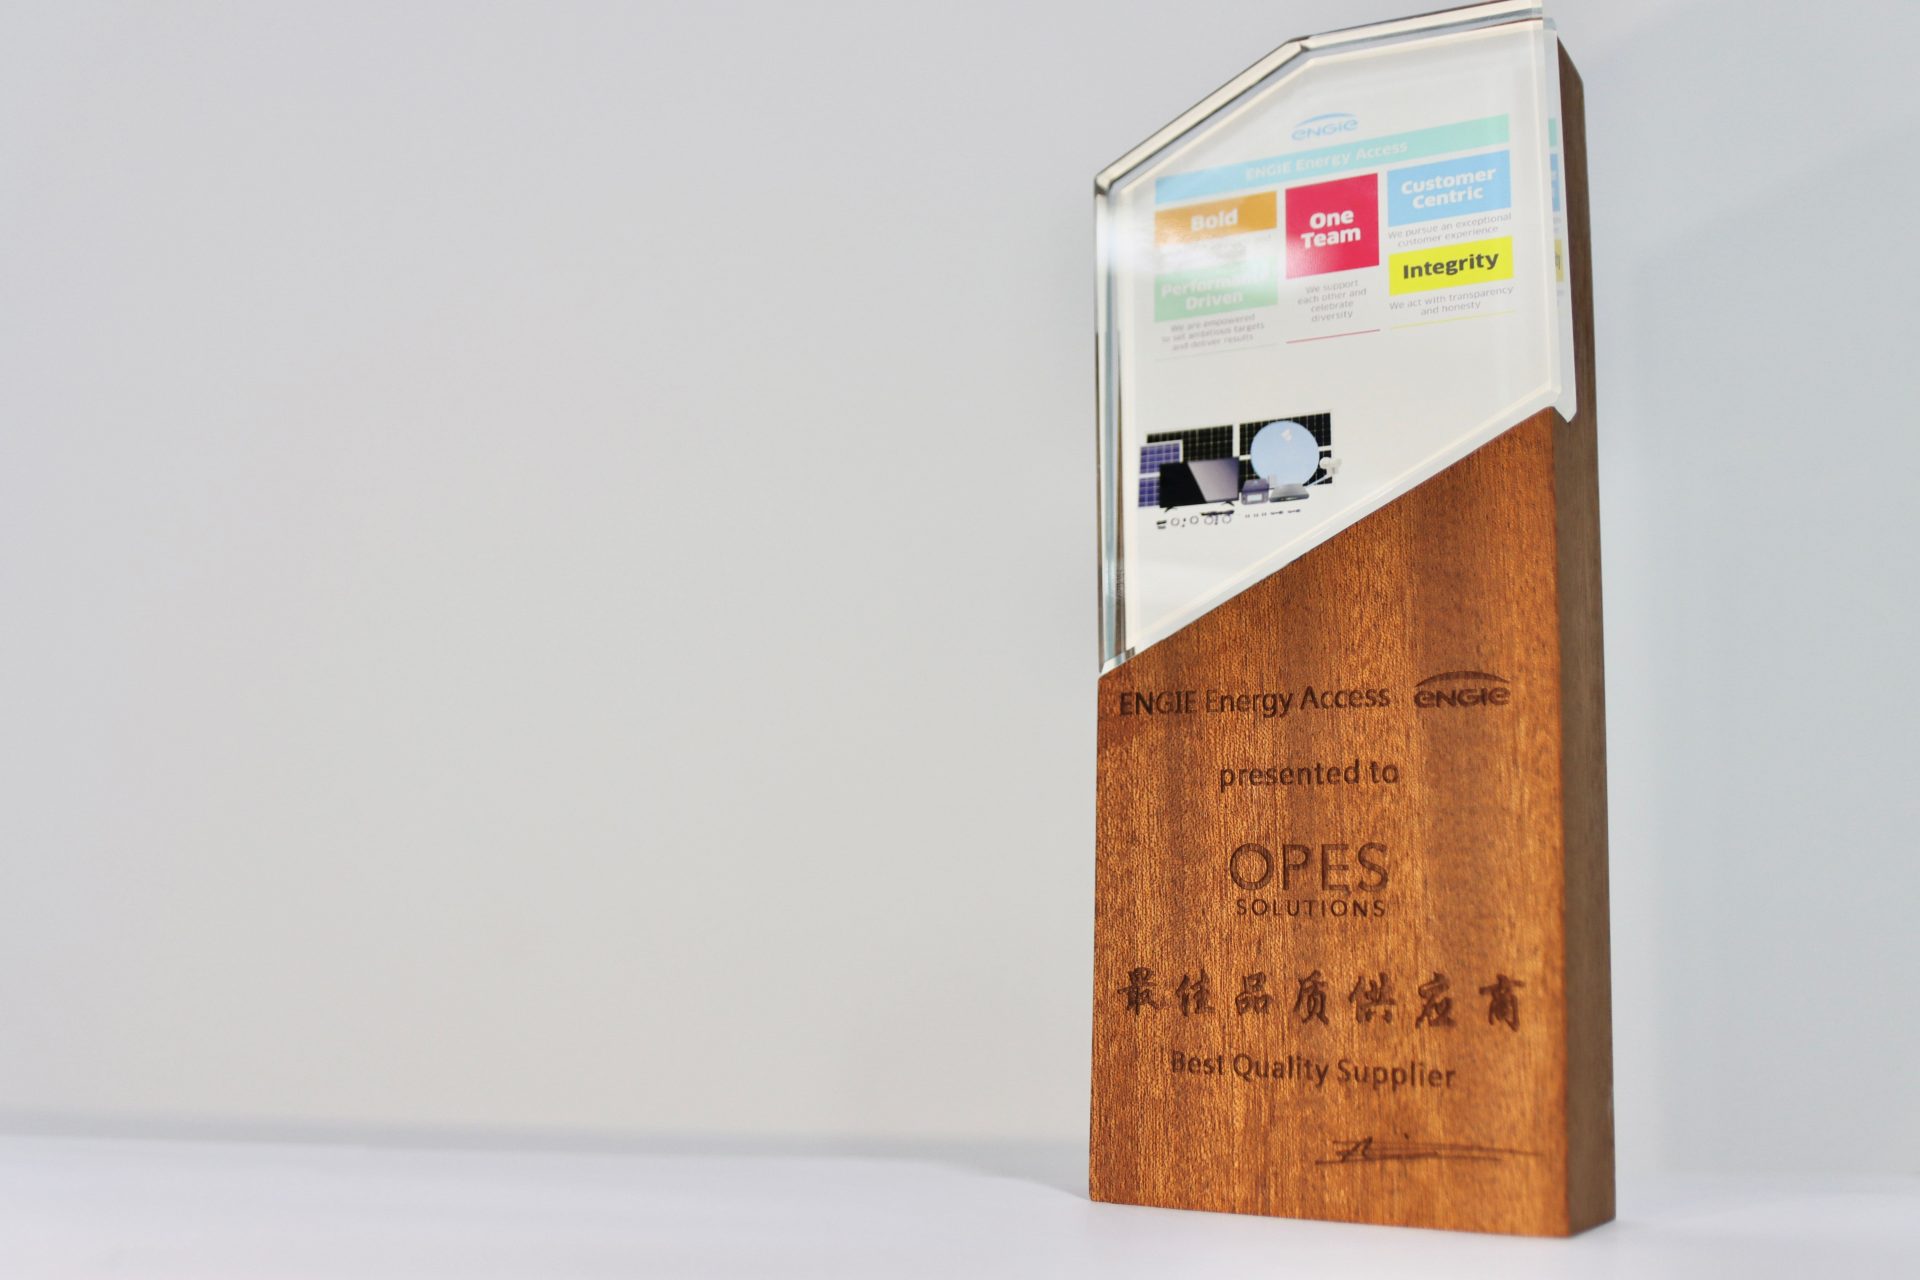 OPES Solutions receives ENGIE “Best Quality Supplier” award